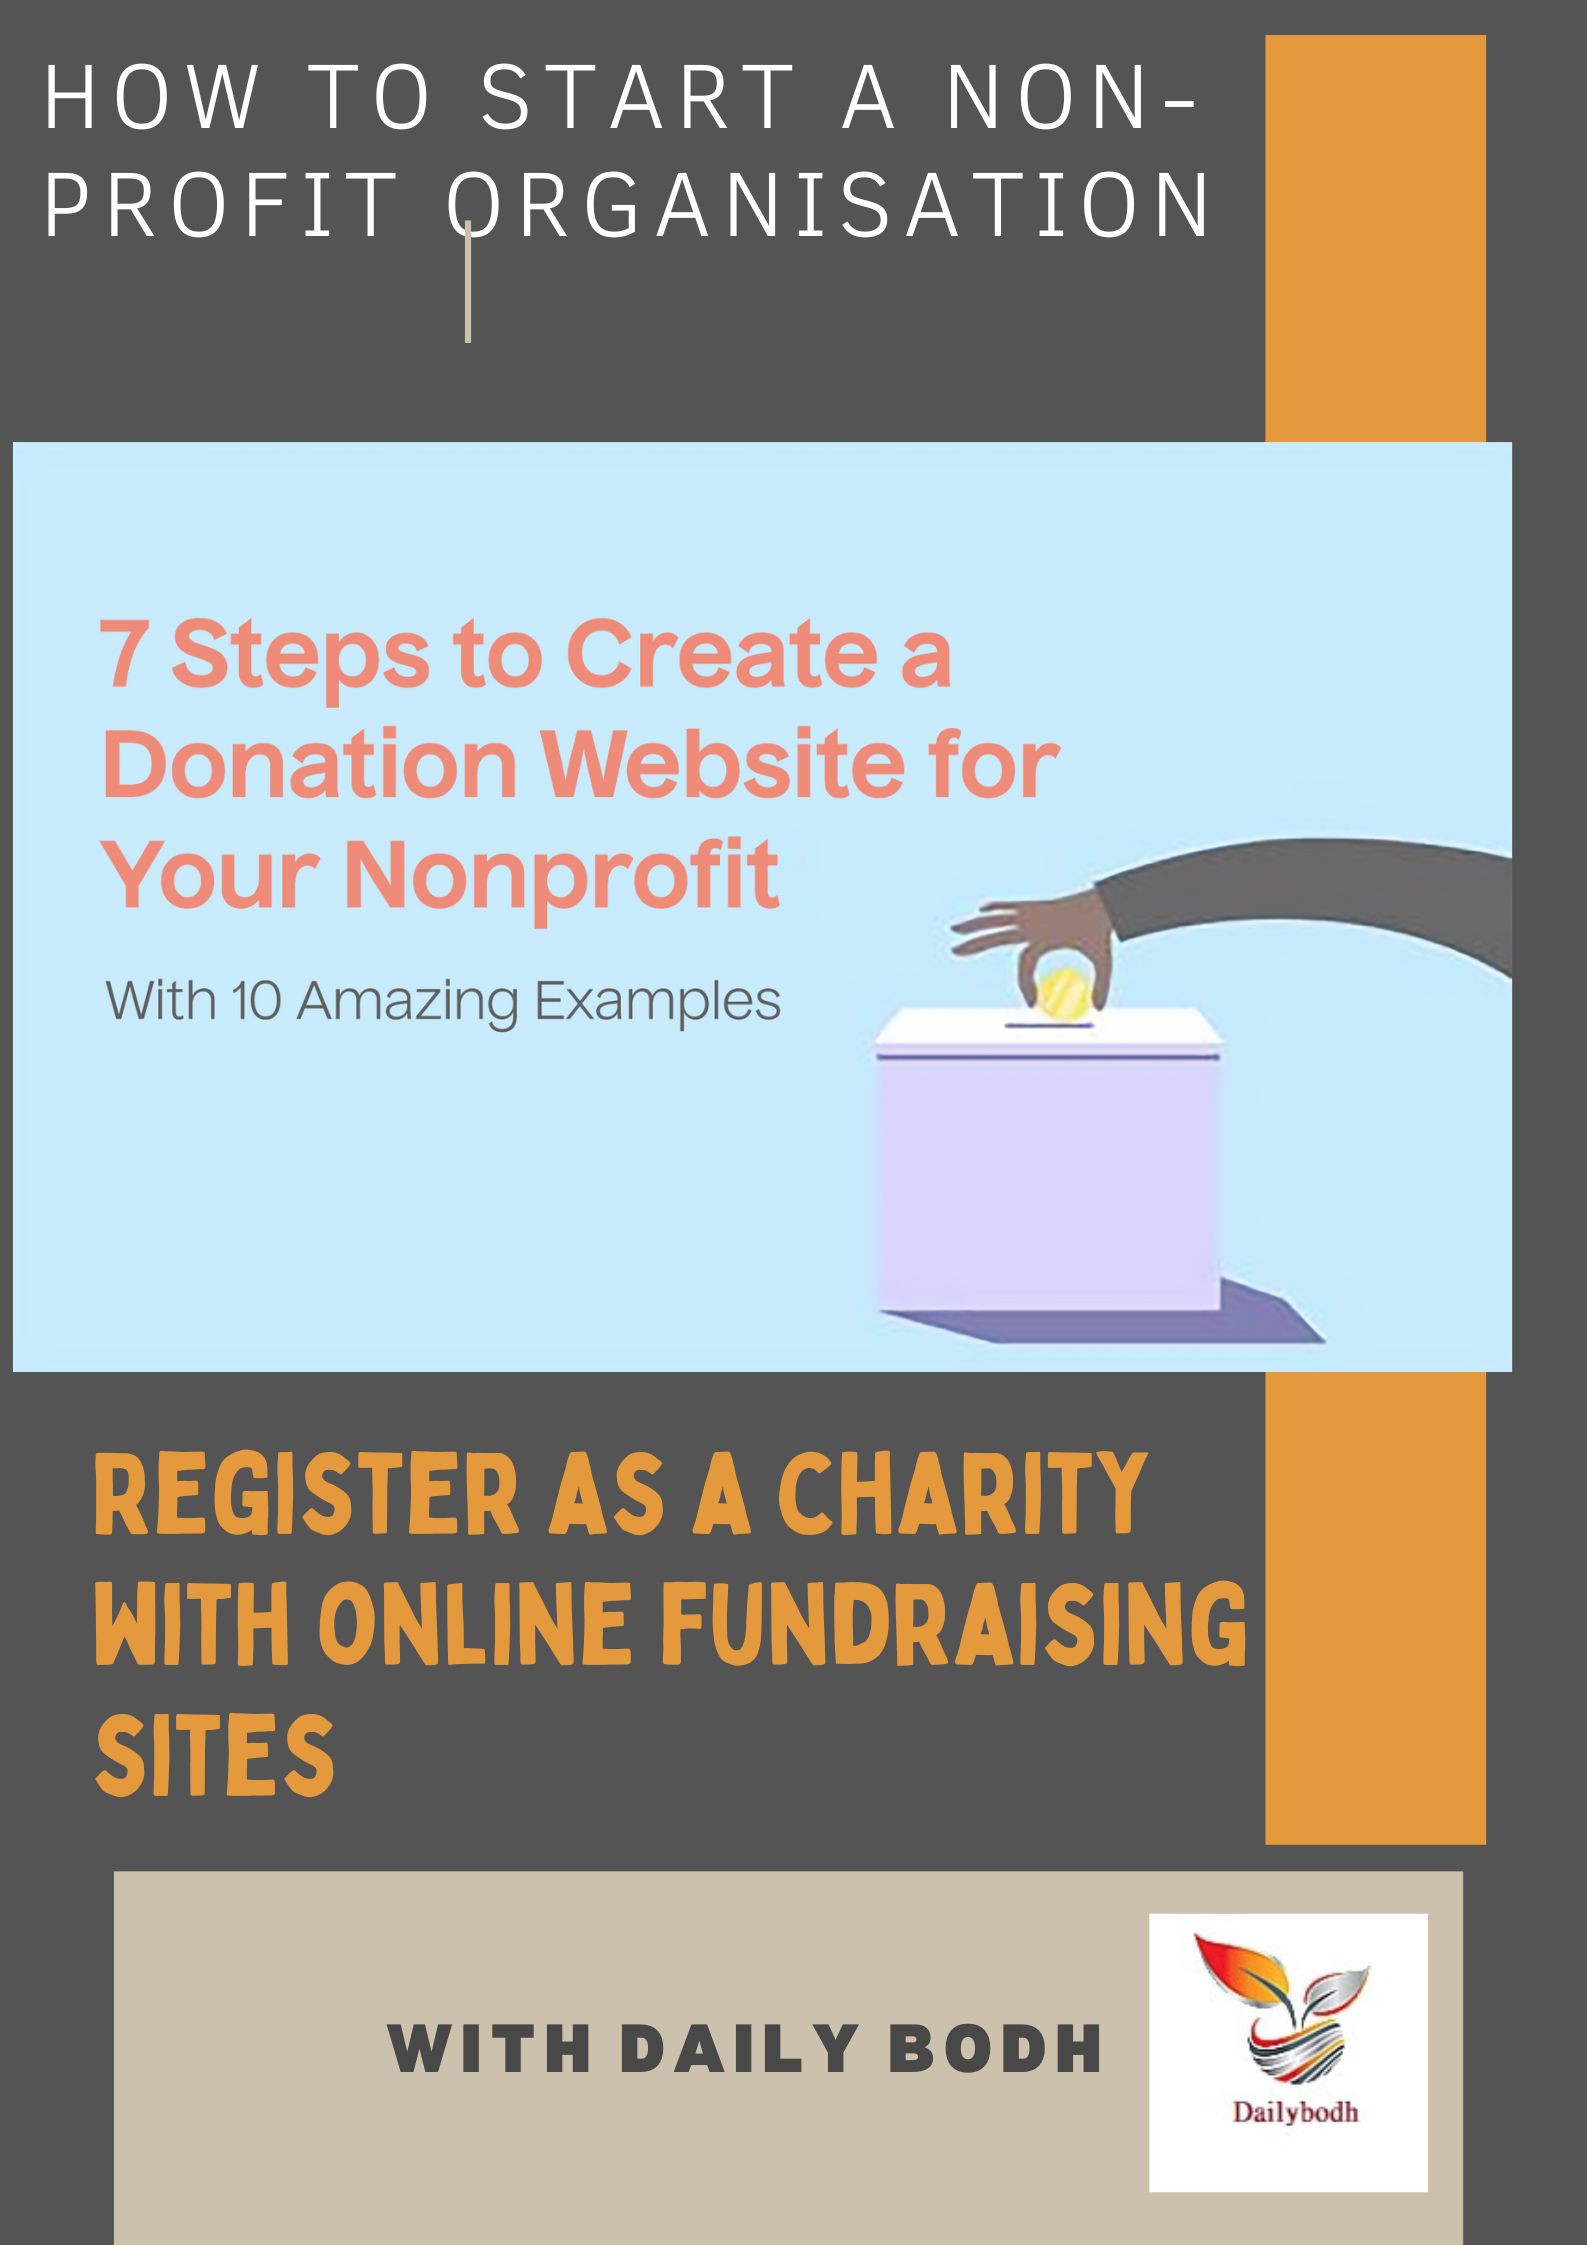 How to start a non-profit organization